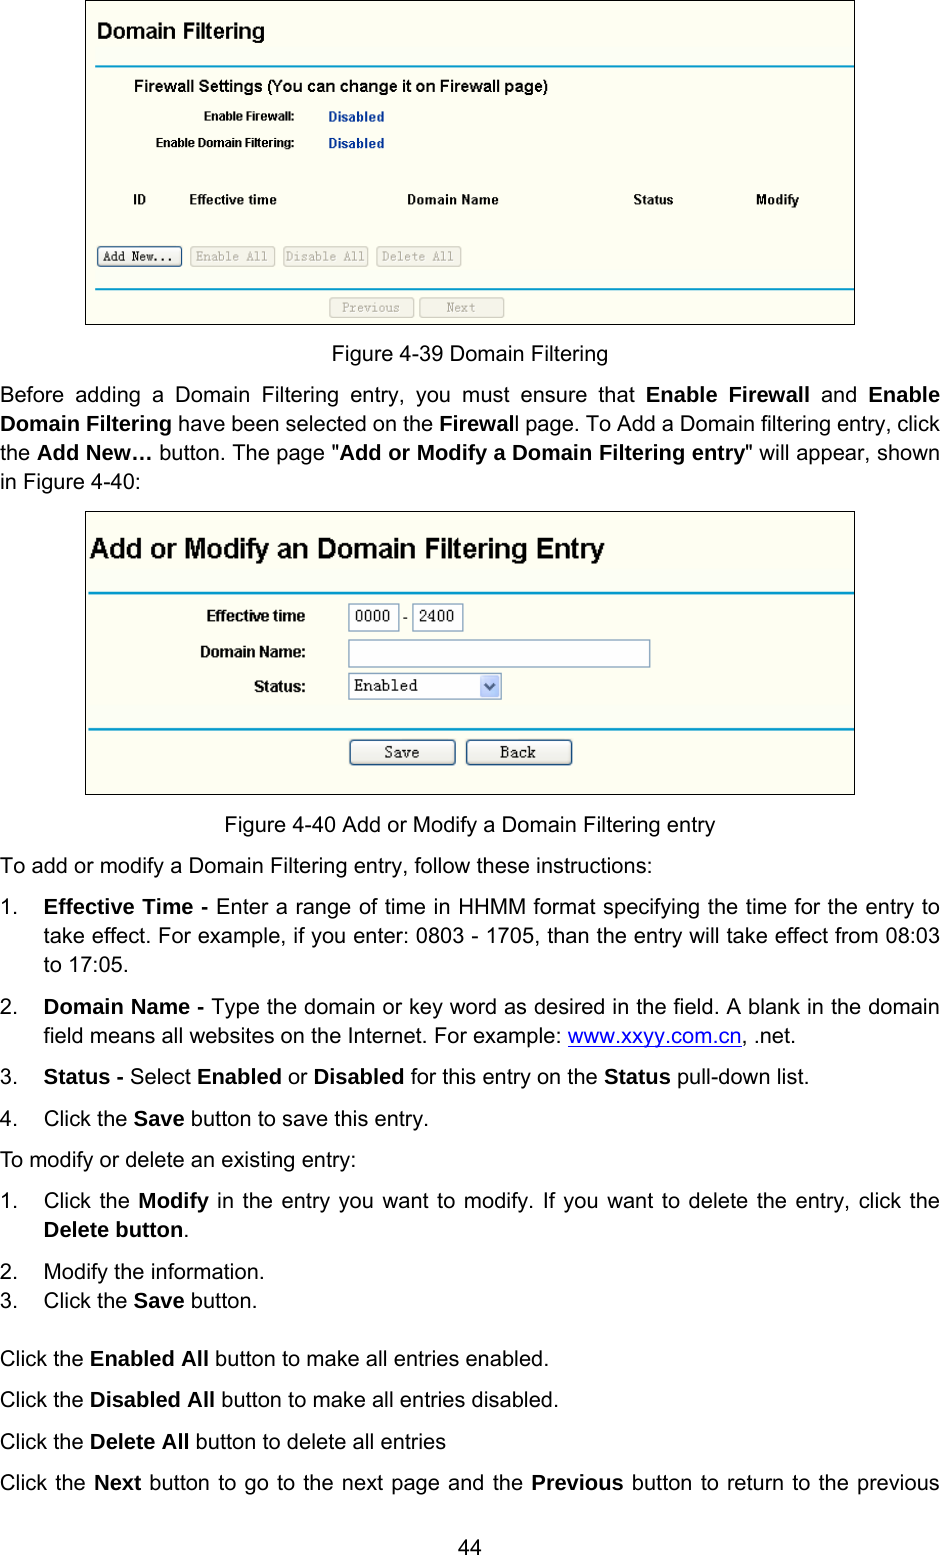  44  Figure 4-39 Domain Filtering Before adding a Domain Filtering entry, you must ensure that Enable Firewall and Enable Domain Filtering have been selected on the Firewall page. To Add a Domain filtering entry, click the Add New… button. The page &quot;Add or Modify a Domain Filtering entry&quot; will appear, shown in Figure 4-40:  Figure 4-40 Add or Modify a Domain Filtering entry To add or modify a Domain Filtering entry, follow these instructions: 1.  Effective Time - Enter a range of time in HHMM format specifying the time for the entry to take effect. For example, if you enter: 0803 - 1705, than the entry will take effect from 08:03 to 17:05. 2.  Domain Name - Type the domain or key word as desired in the field. A blank in the domain field means all websites on the Internet. For example: www.xxyy.com.cn, .net. 3.  Status - Select Enabled or Disabled for this entry on the Status pull-down list. 4. Click the Save button to save this entry. To modify or delete an existing entry: 1. Click the Modify in the entry you want to modify. If you want to delete the entry, click the Delete button. 2.  Modify the information.   3. Click the Save button. Click the Enabled All button to make all entries enabled. Click the Disabled All button to make all entries disabled. Click the Delete All button to delete all entries Click the Next button to go to the next page and the Previous button to return to the previous 